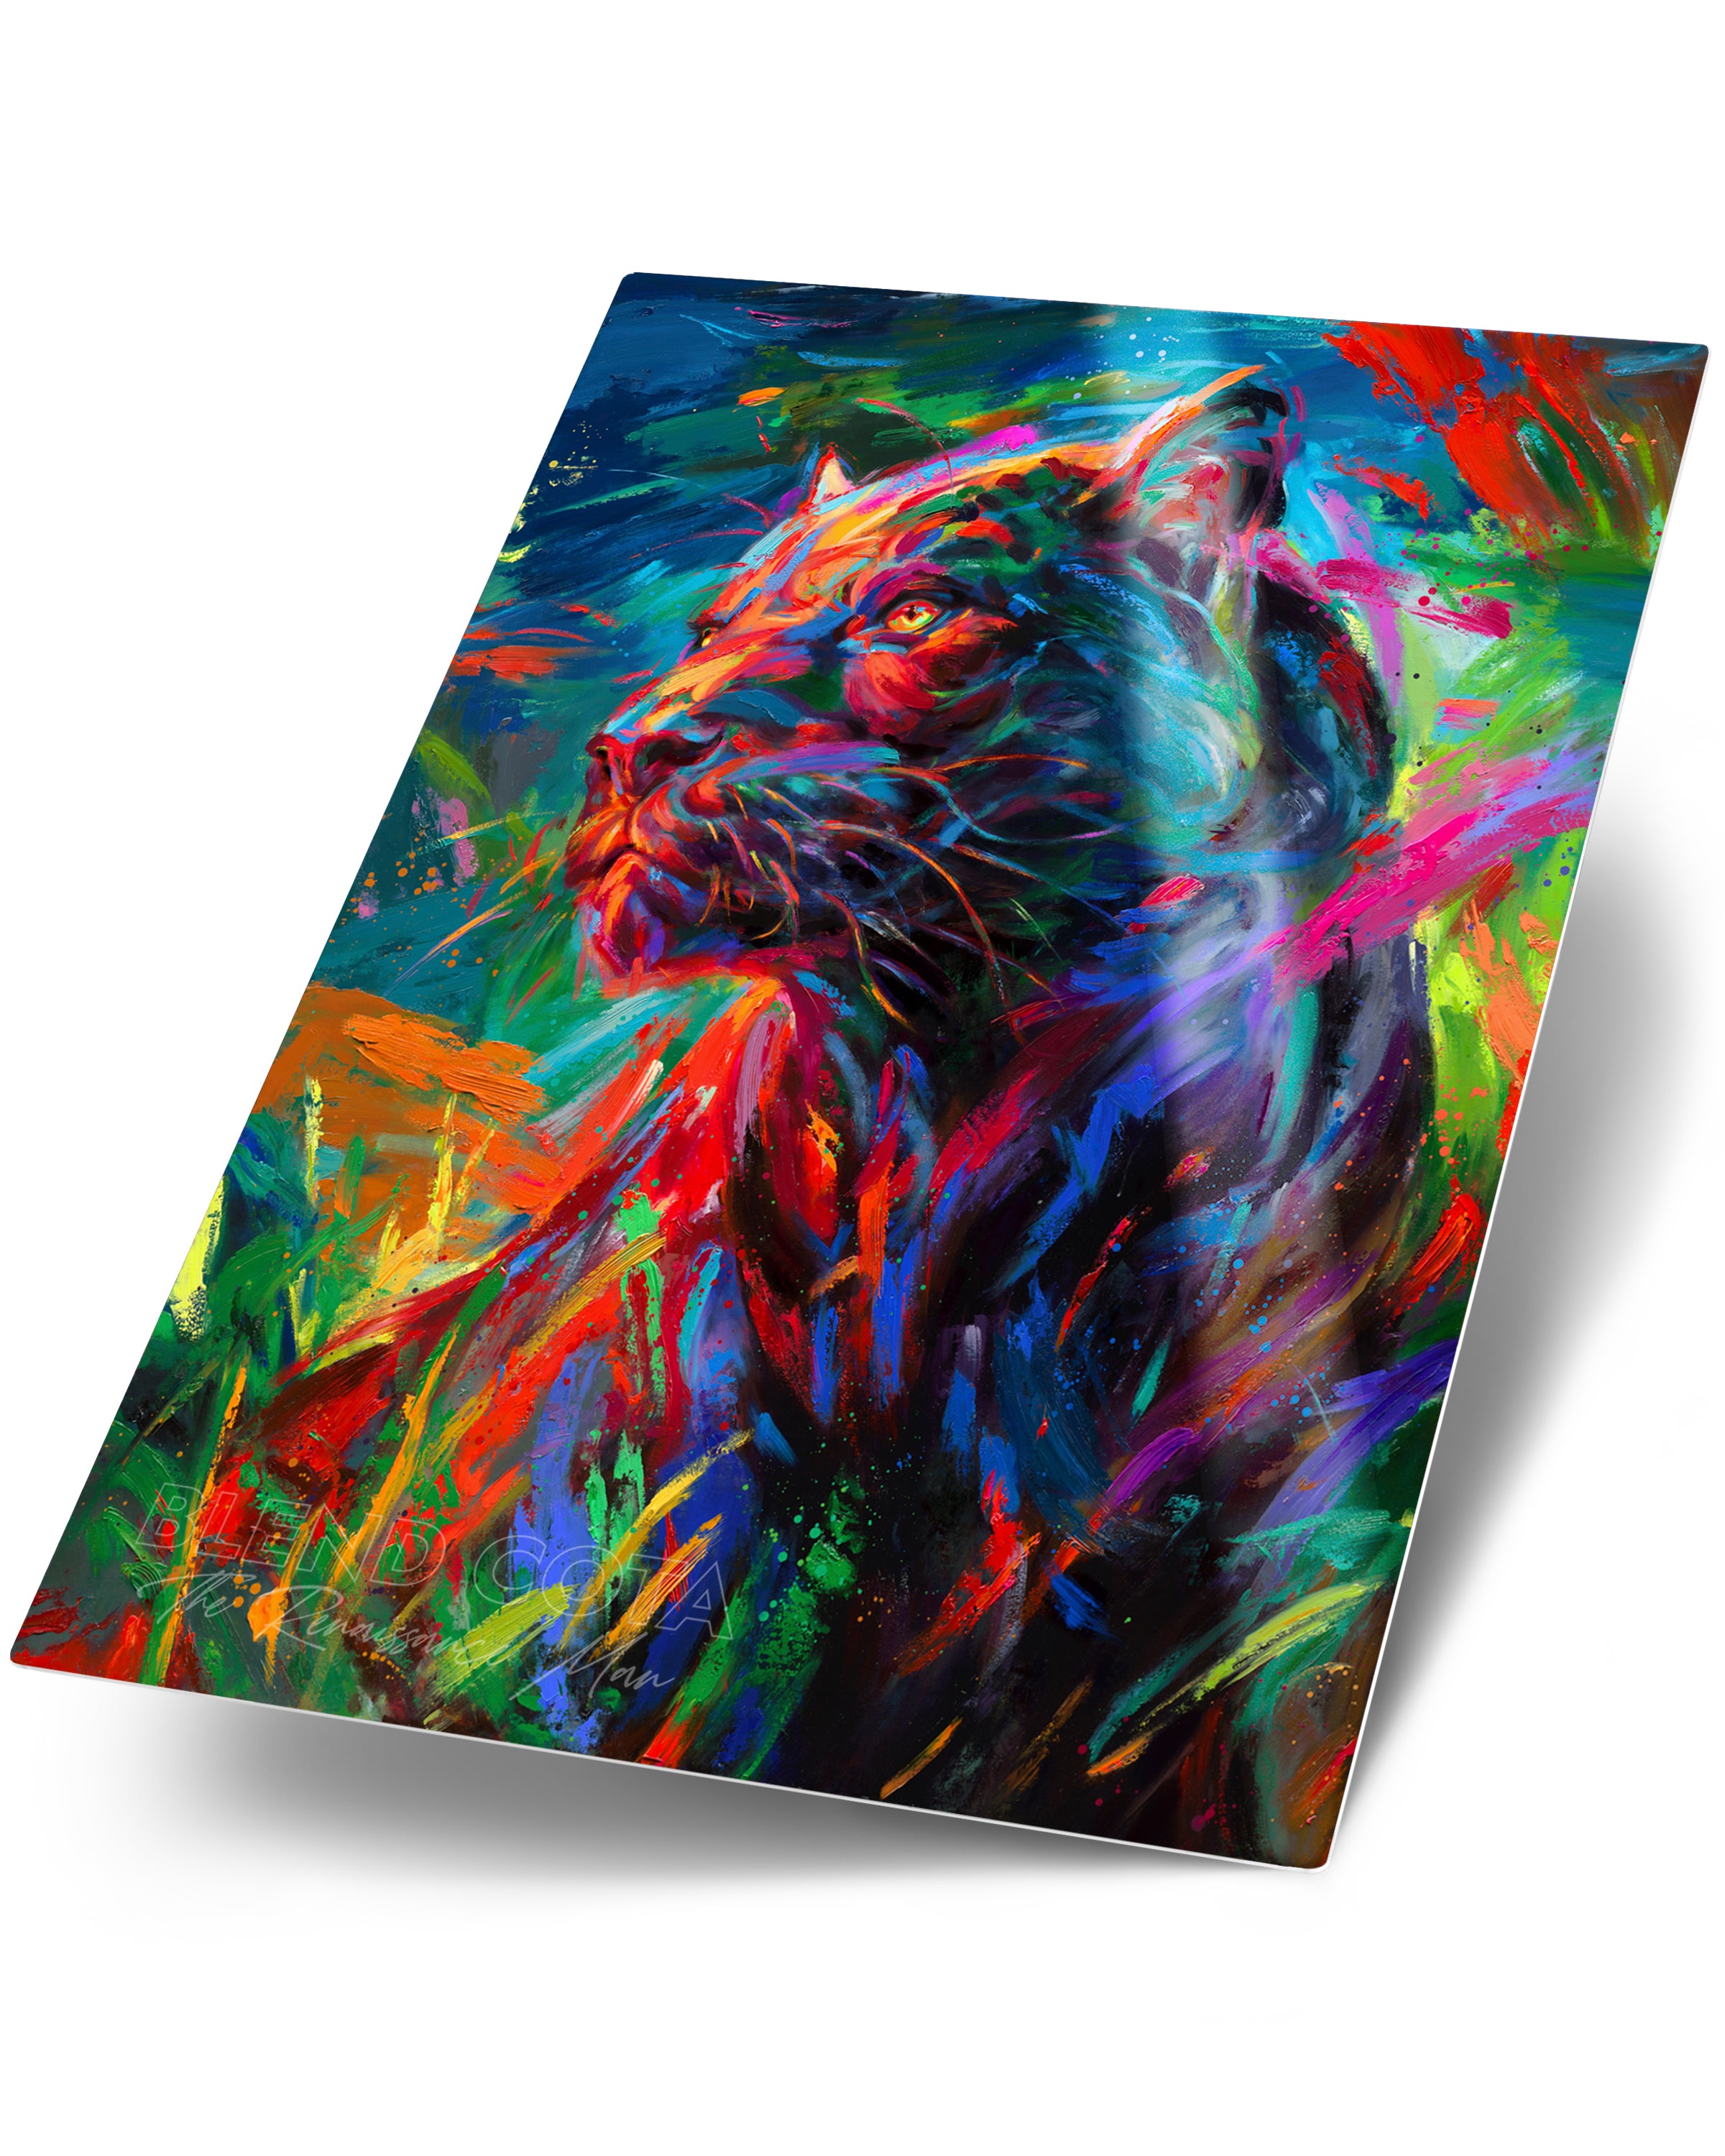 Art print on metal of the black panther stalking its prey through the long night painted with colorful brushstrokes in an expressionistic style.